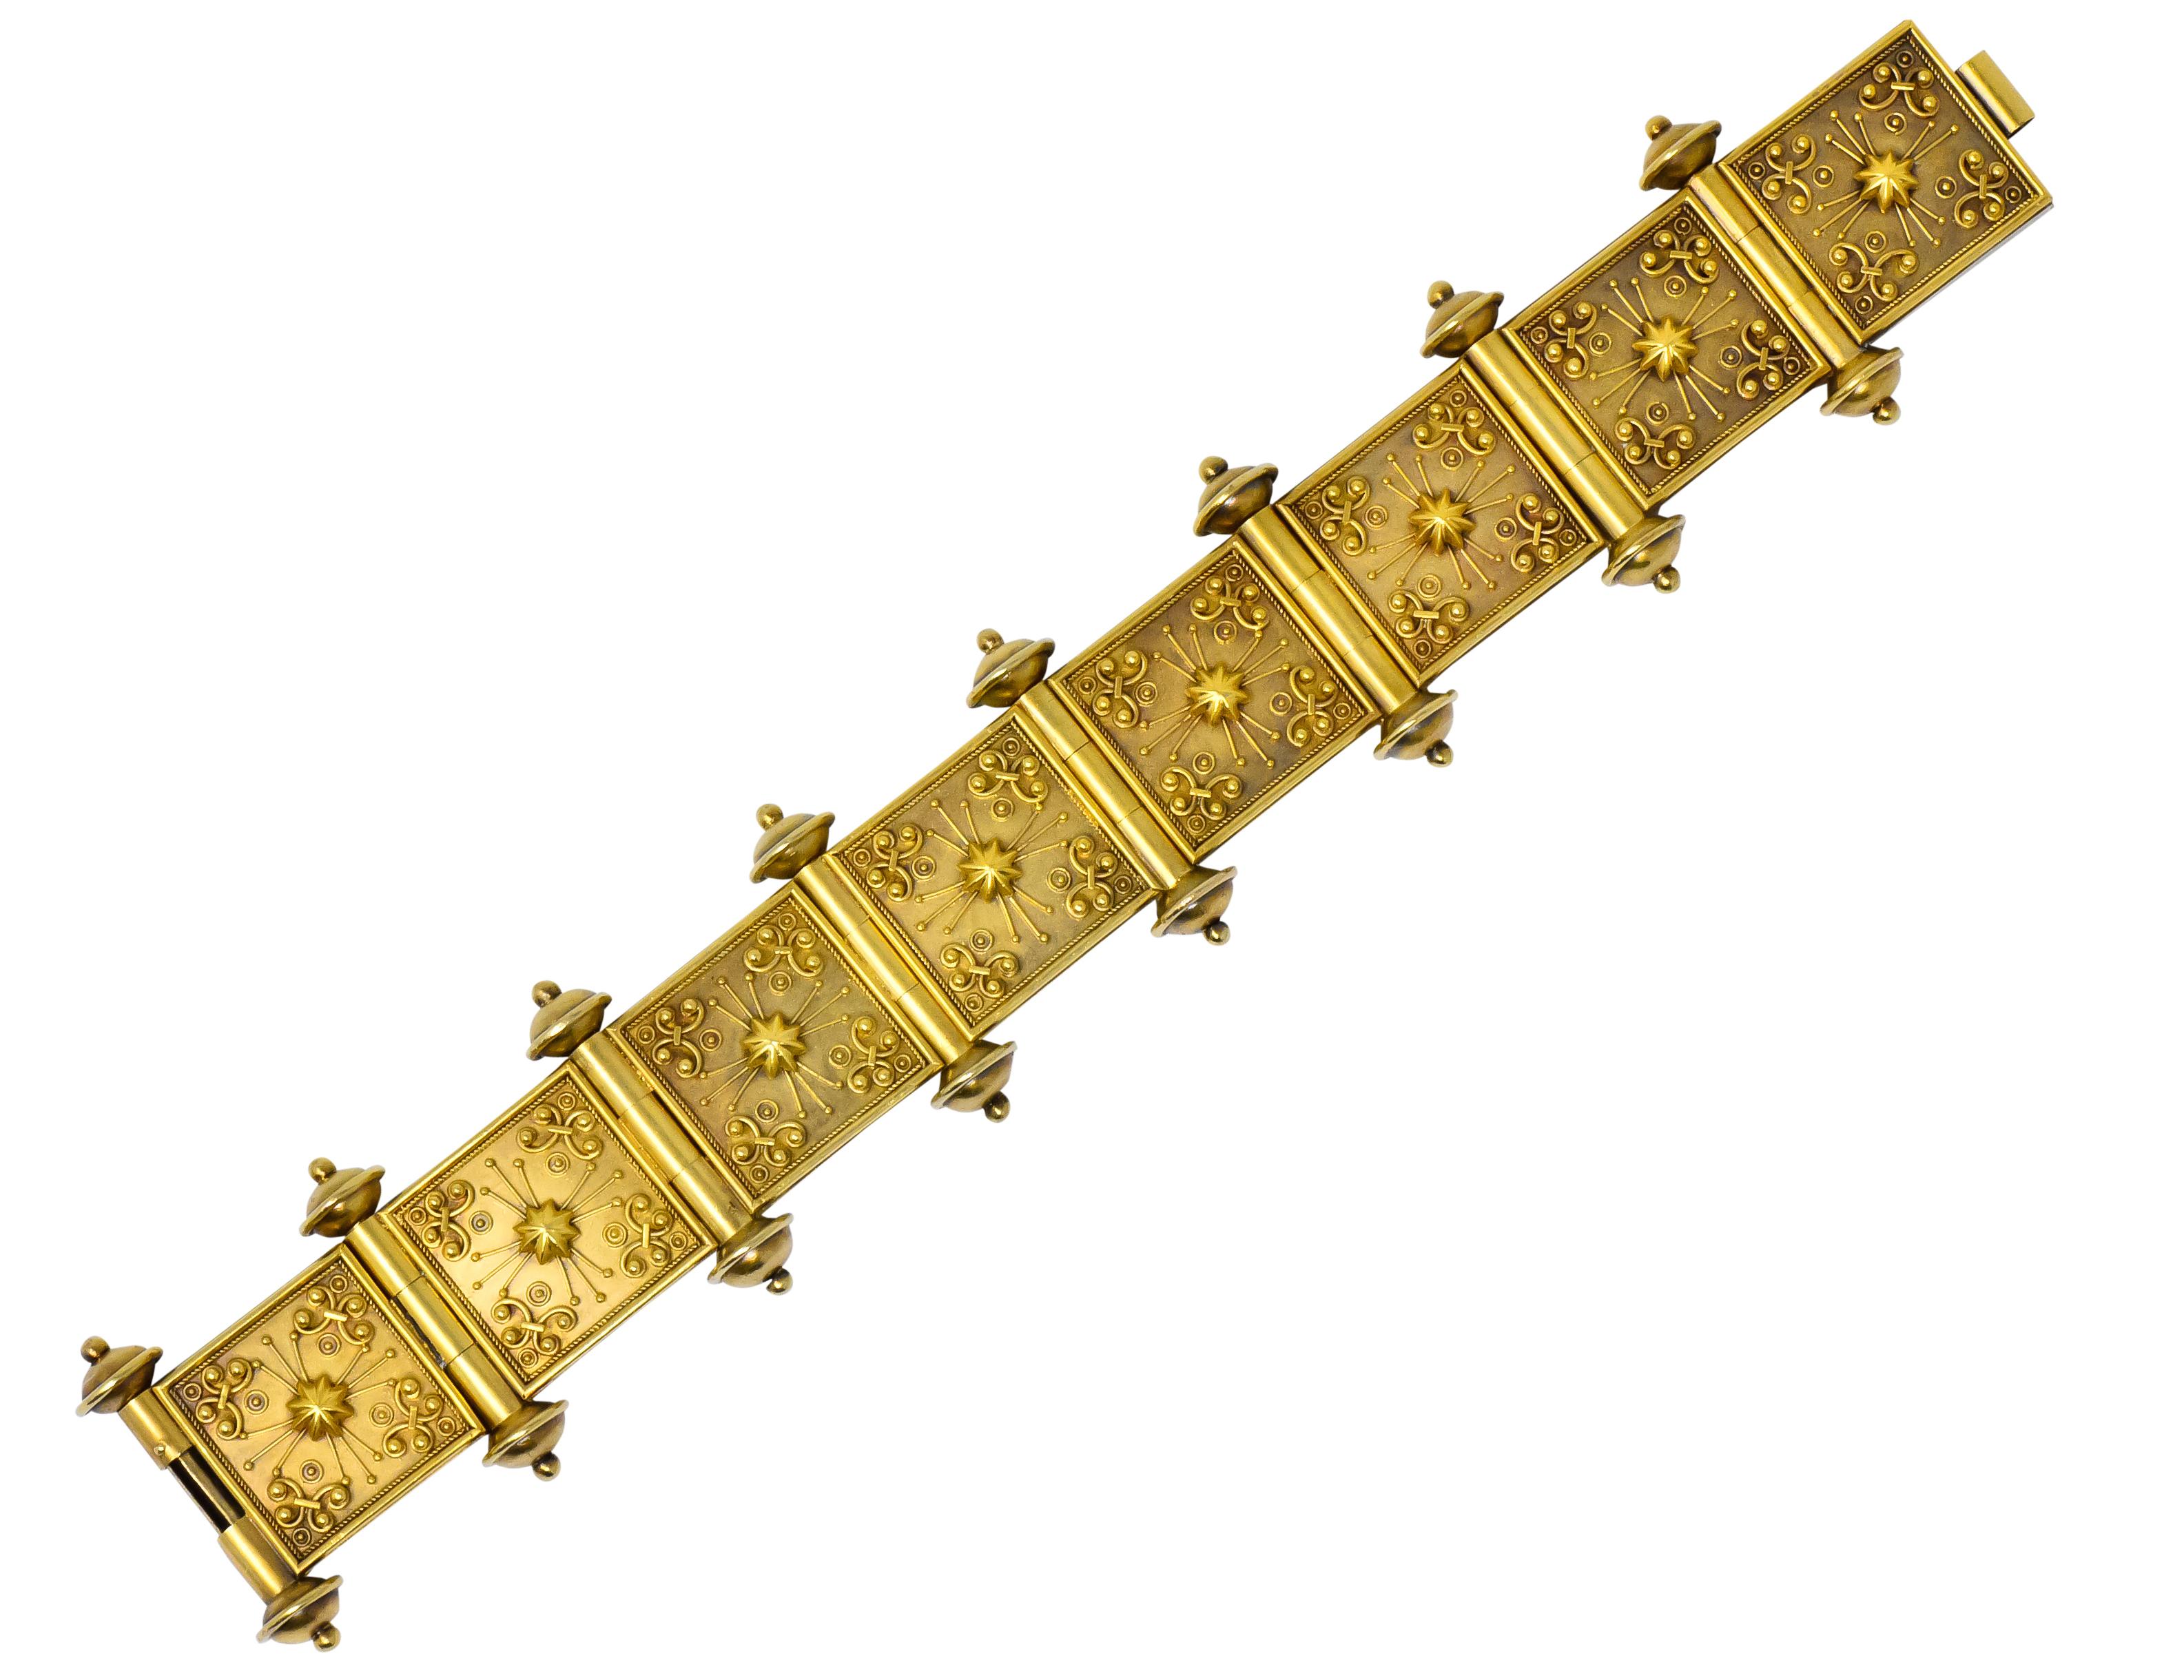 Custom fitted square form links

Each with a starburst motif, with applied polished and twisted gold wire, and gold bead detail

Spacer links with gold bead terminals

Concealed plunge clasp

Circa 1880

Tested as 14 karat gold

Length: 7 1/4